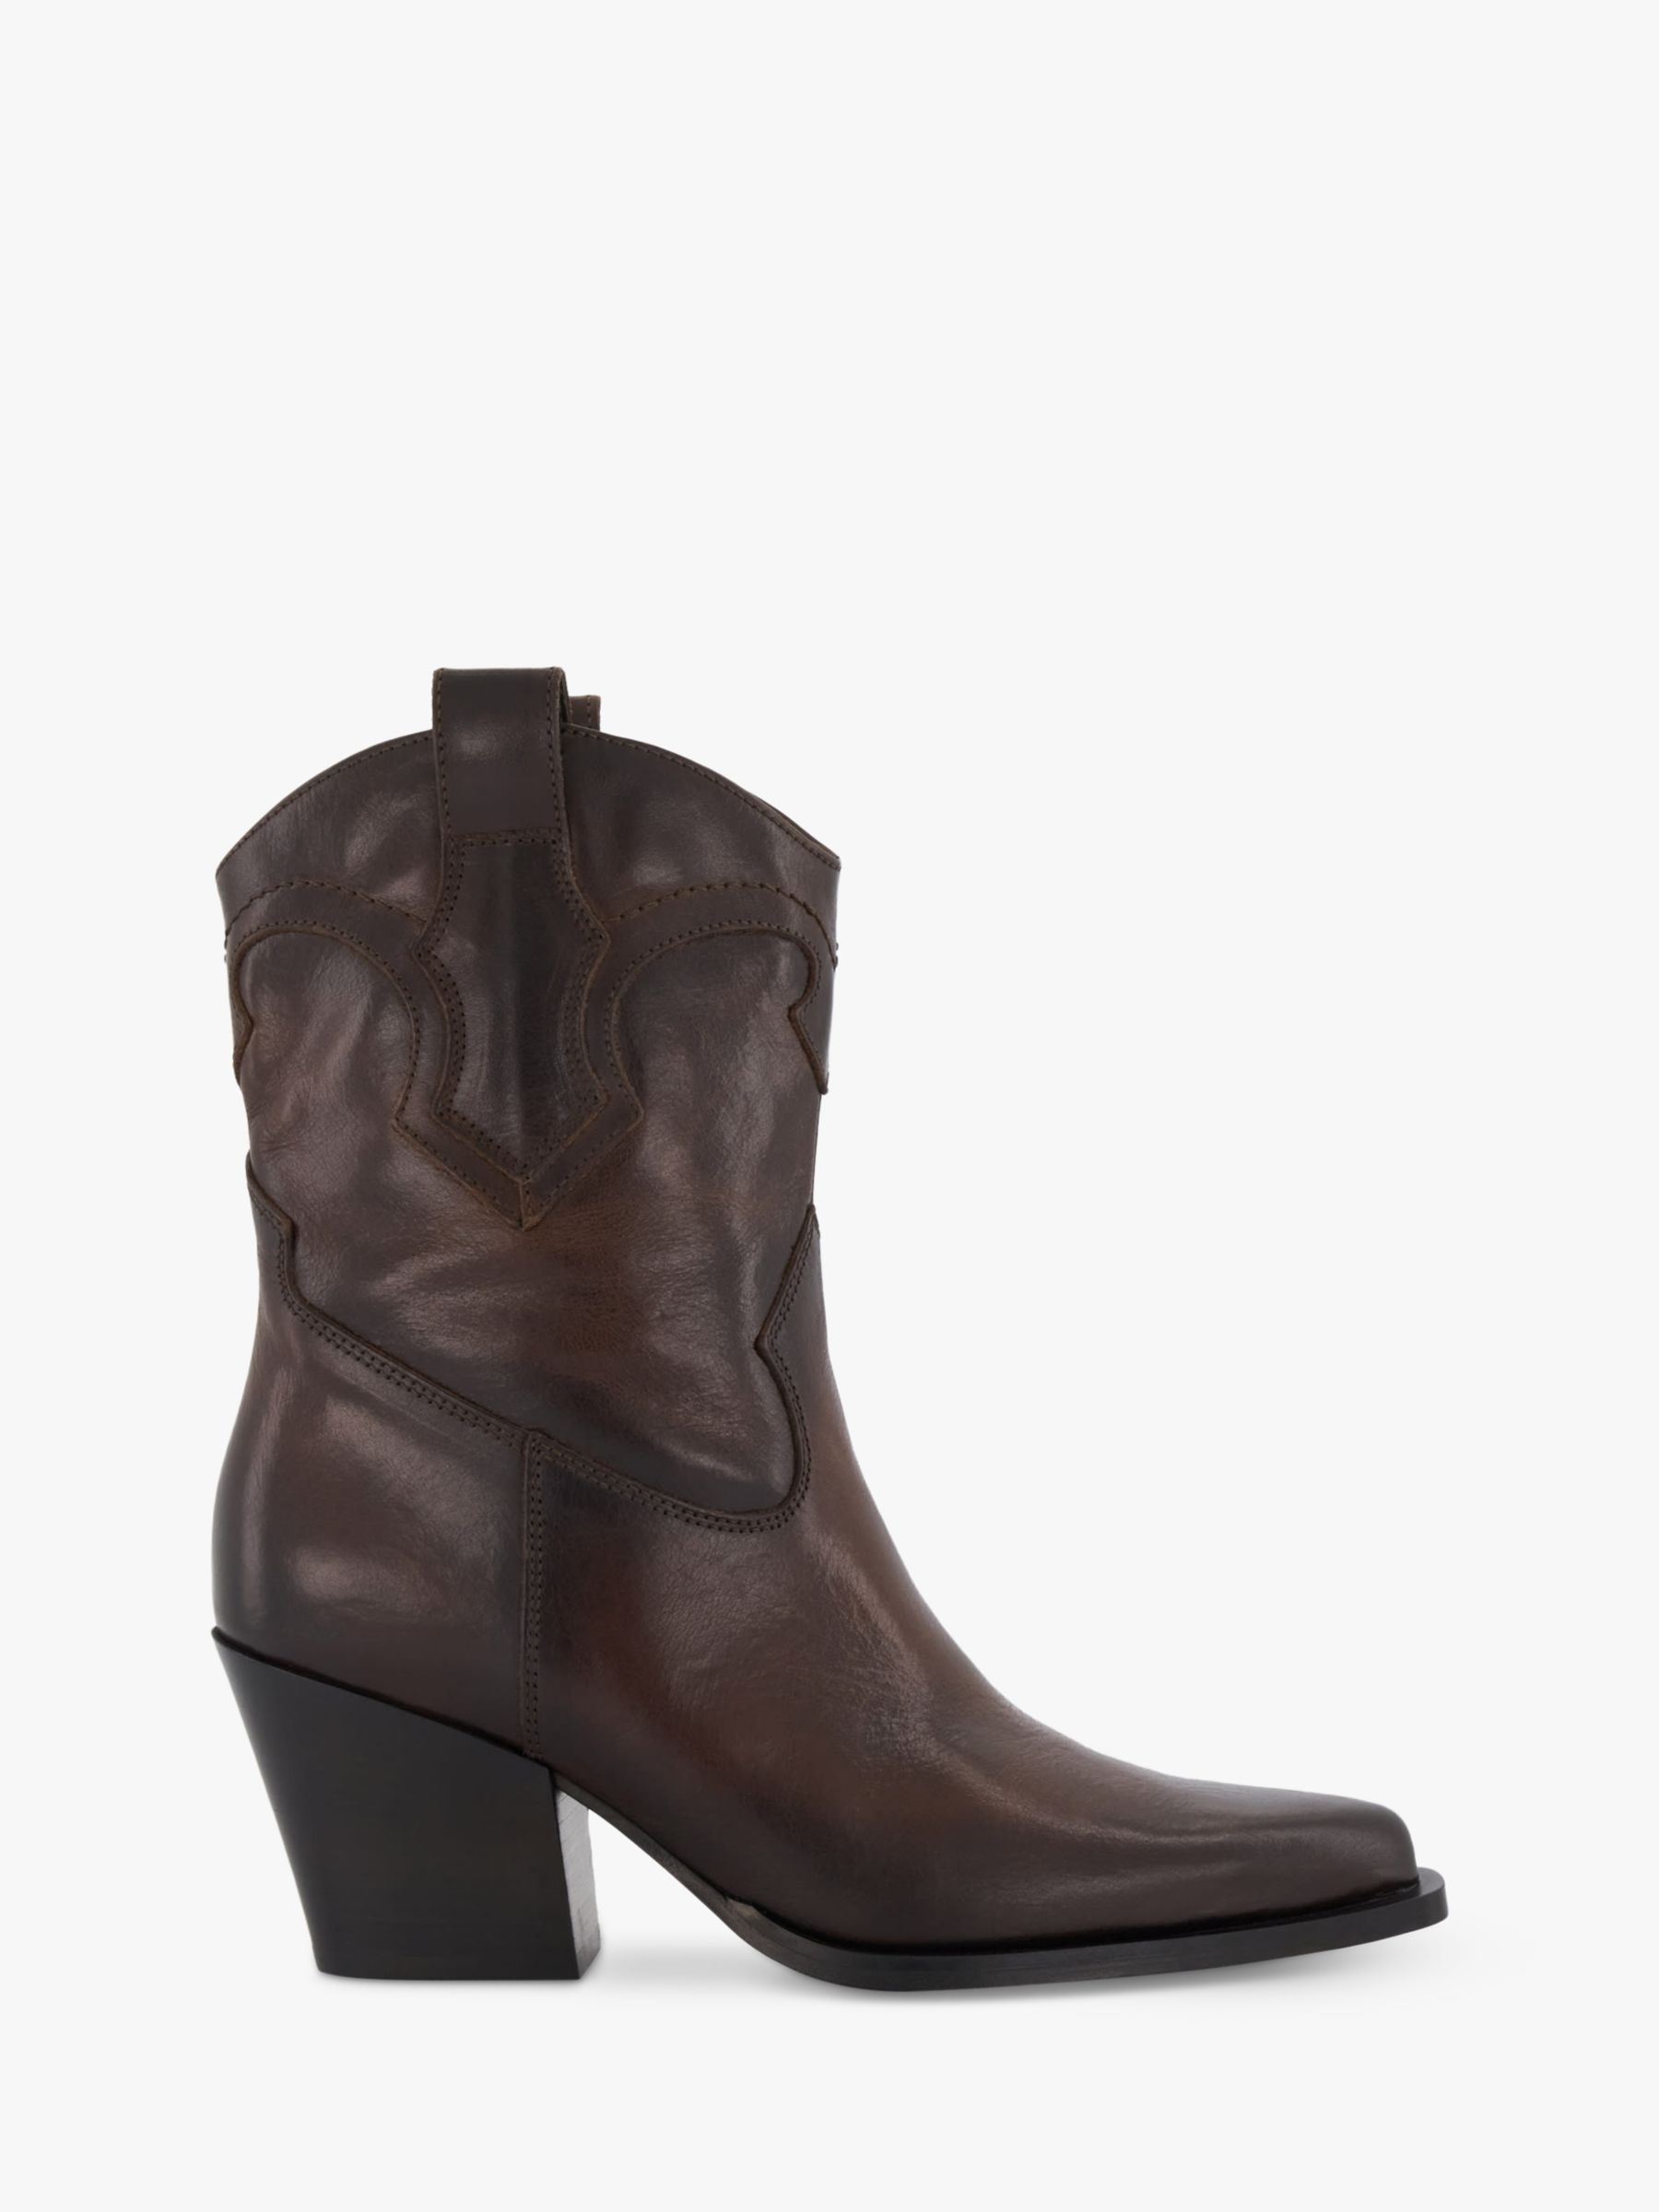 Dune Ponty Leather Western Boot, Brown at John Lewis & Partners